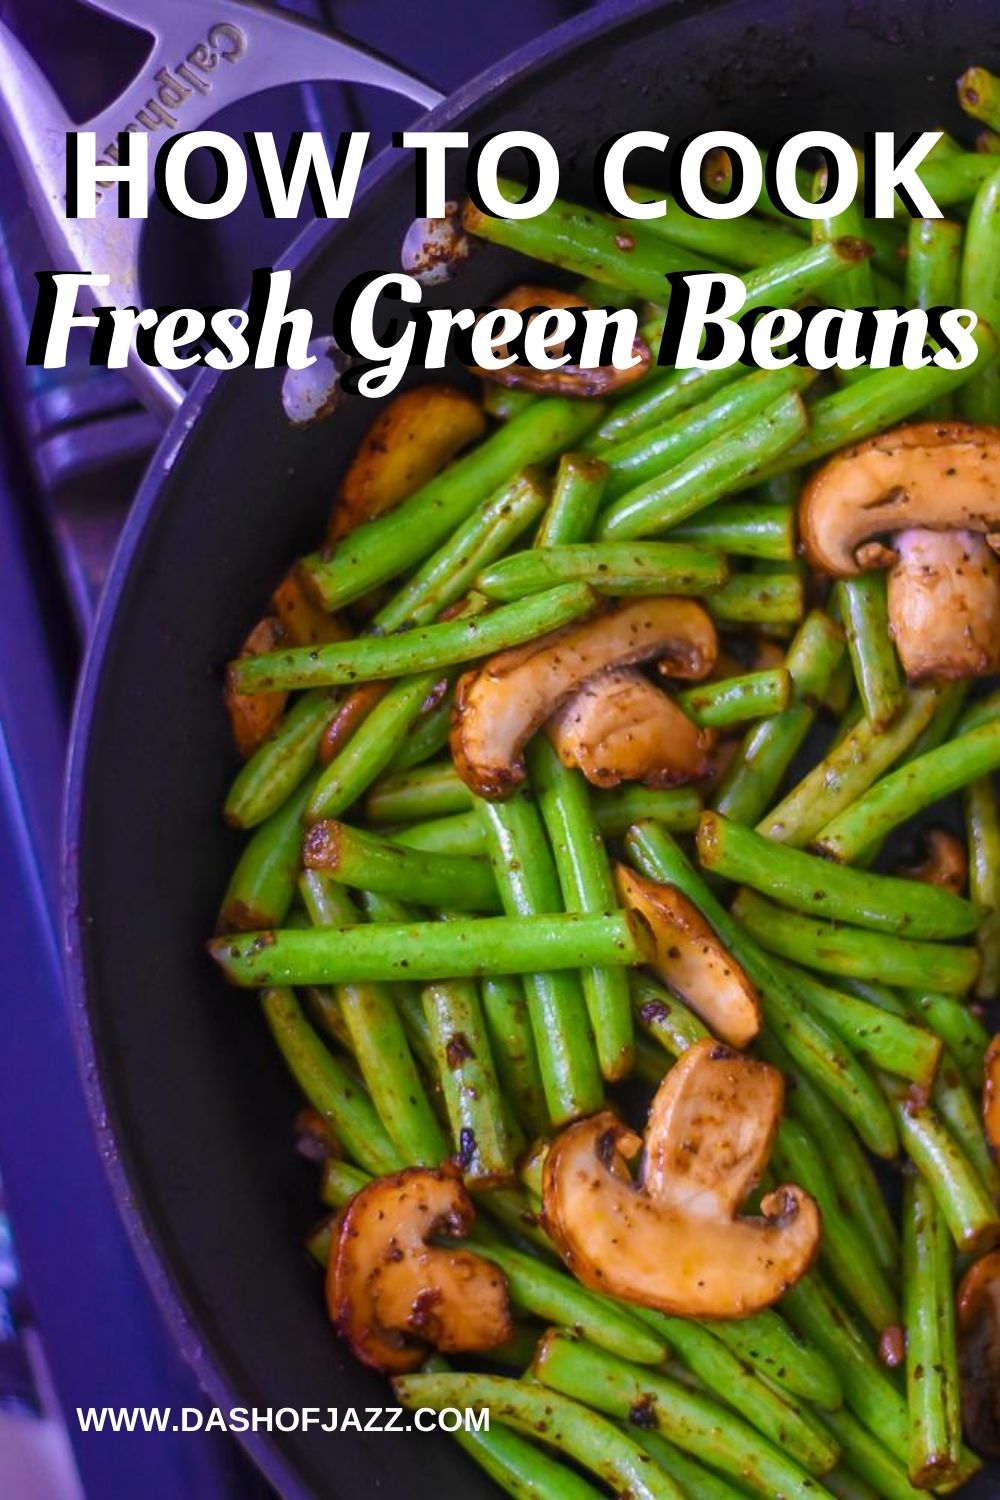 decorative image of green beans for Pinterest